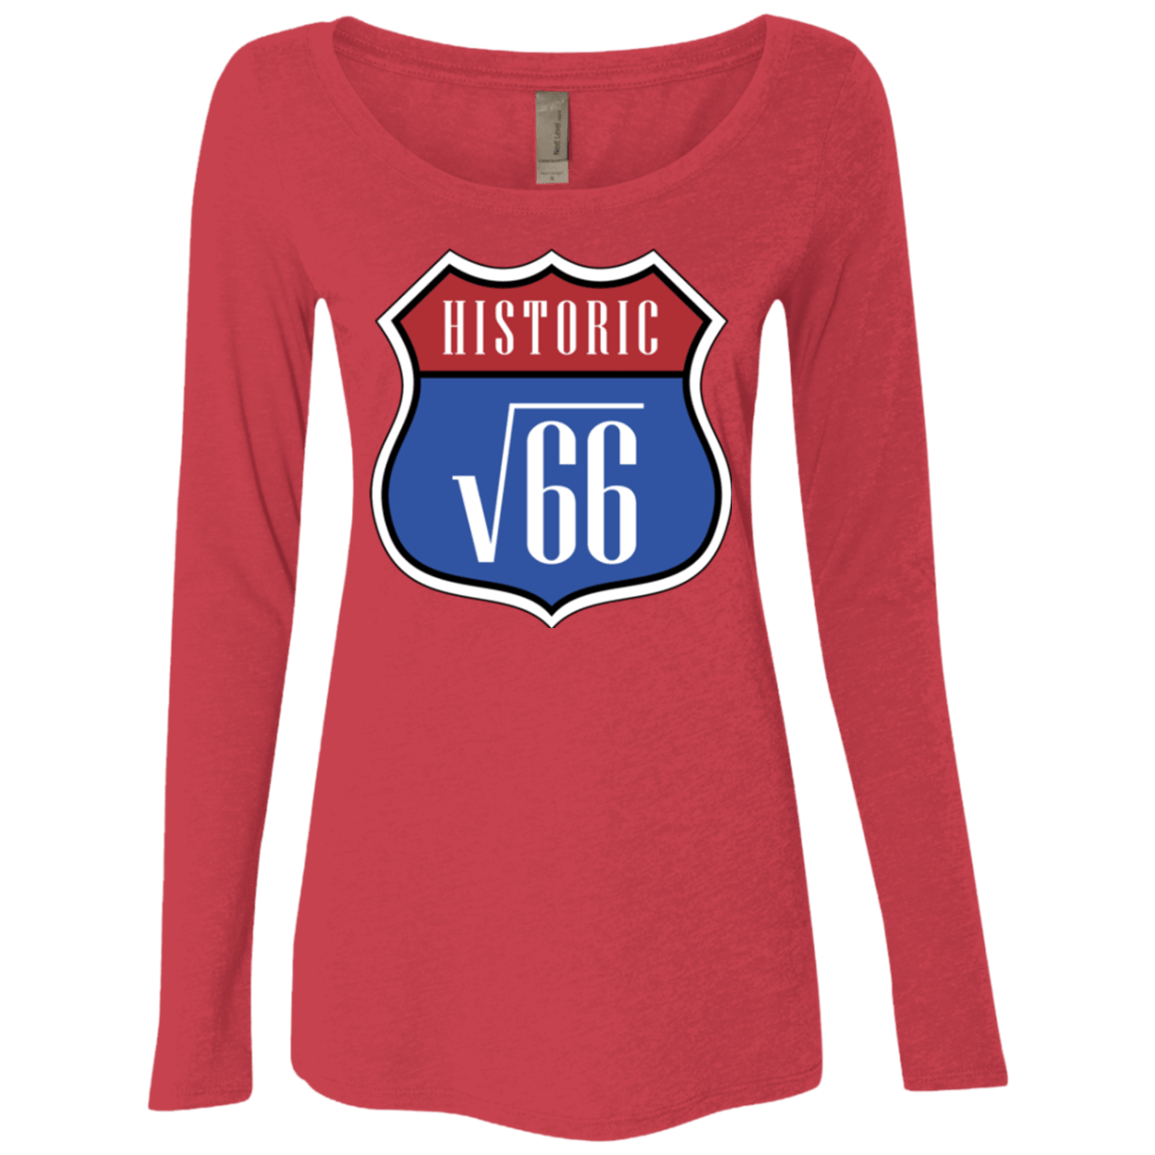 T-Shirts Vintage Red / Small Route v66 Women's Triblend Long Sleeve Shirt